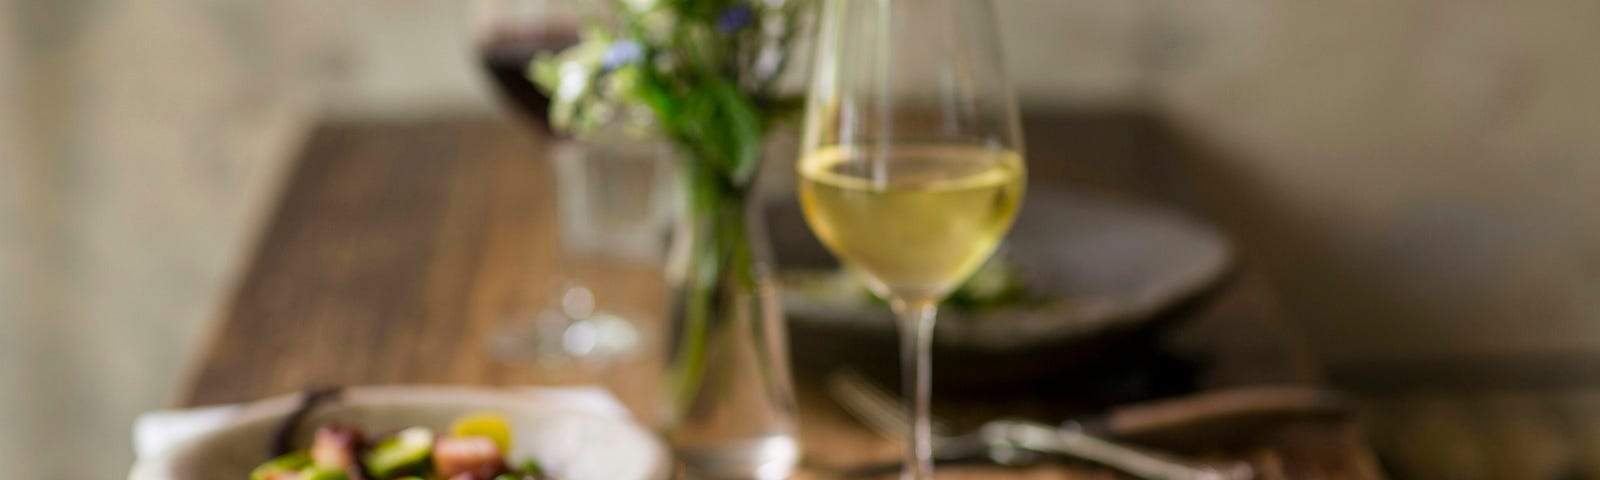 A glass of white wine and two elegant dishes sit on a wooden table.